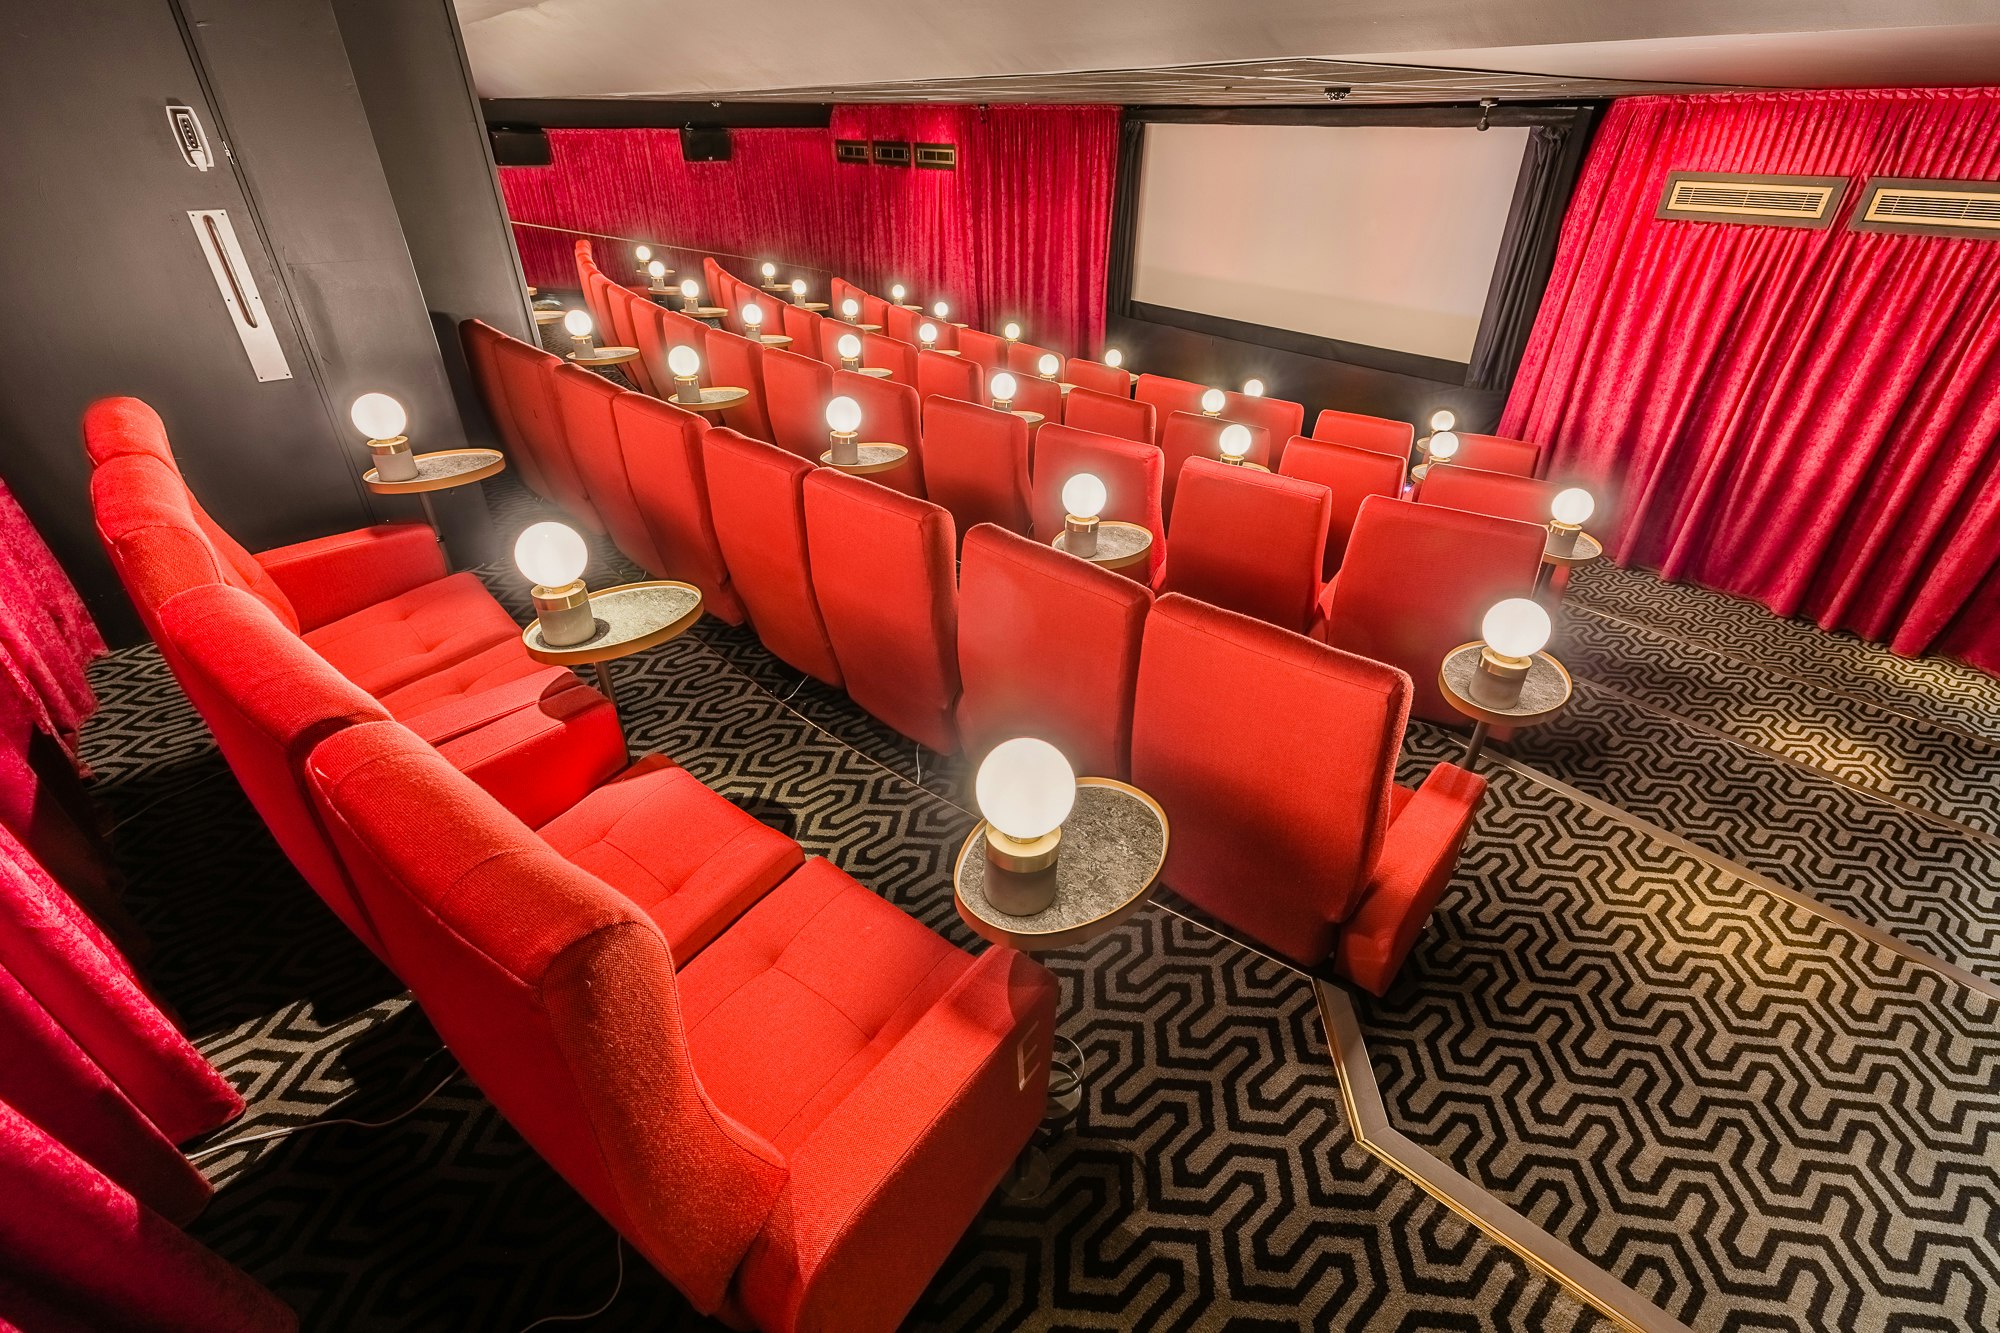 Curzon Mayfair - Screen Two image 9